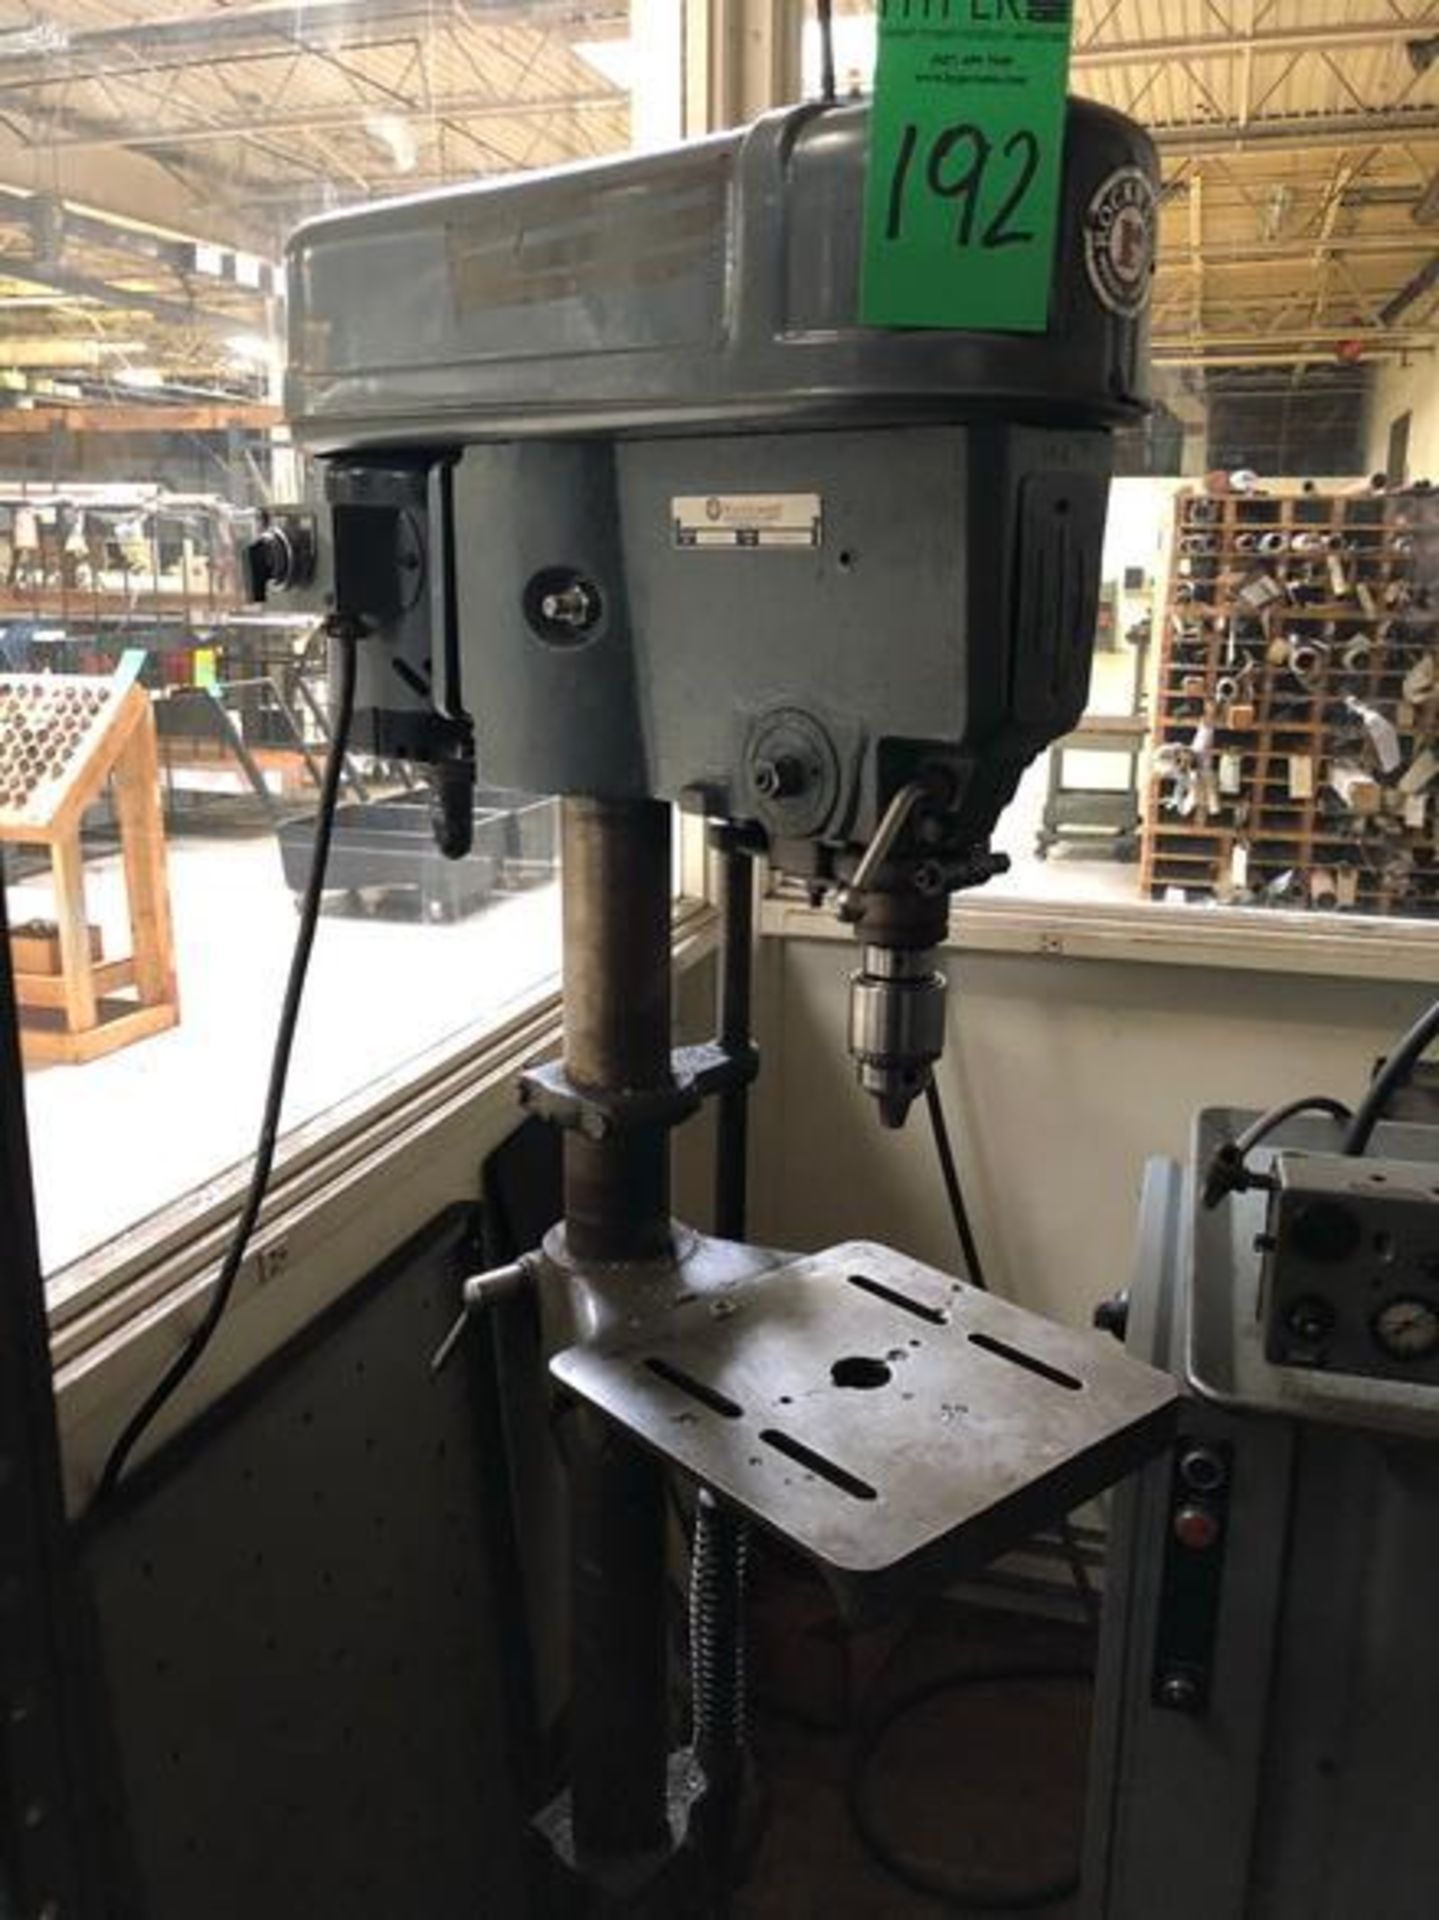 Delta Rockwell Model: 15-017 Drill Press Adjustable table size 10" 1/2 x 10" , Motor model: 62-610 p - Image 3 of 5